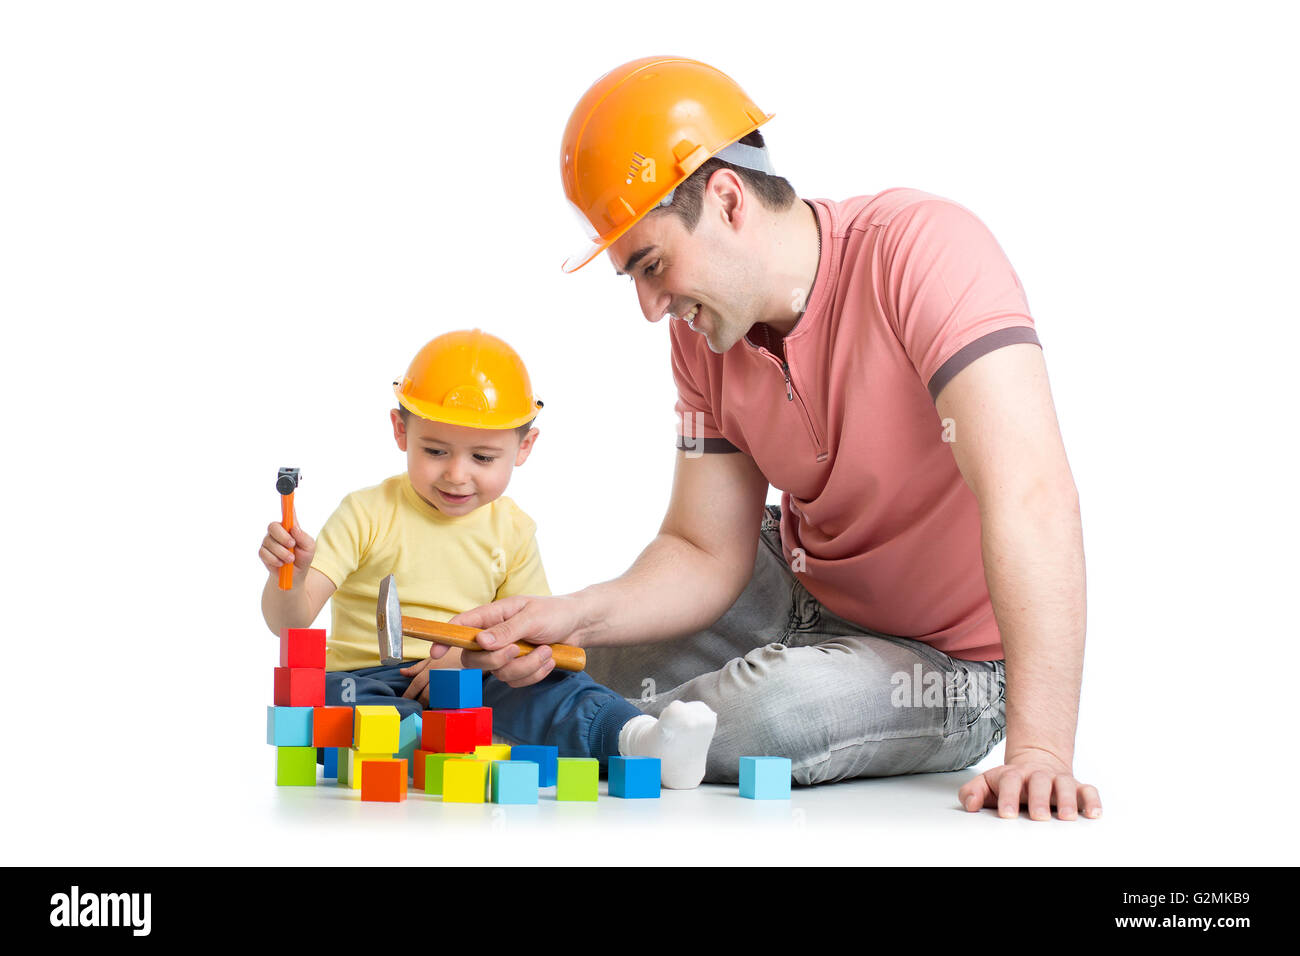 Child and his dad playing game together Stock Photo